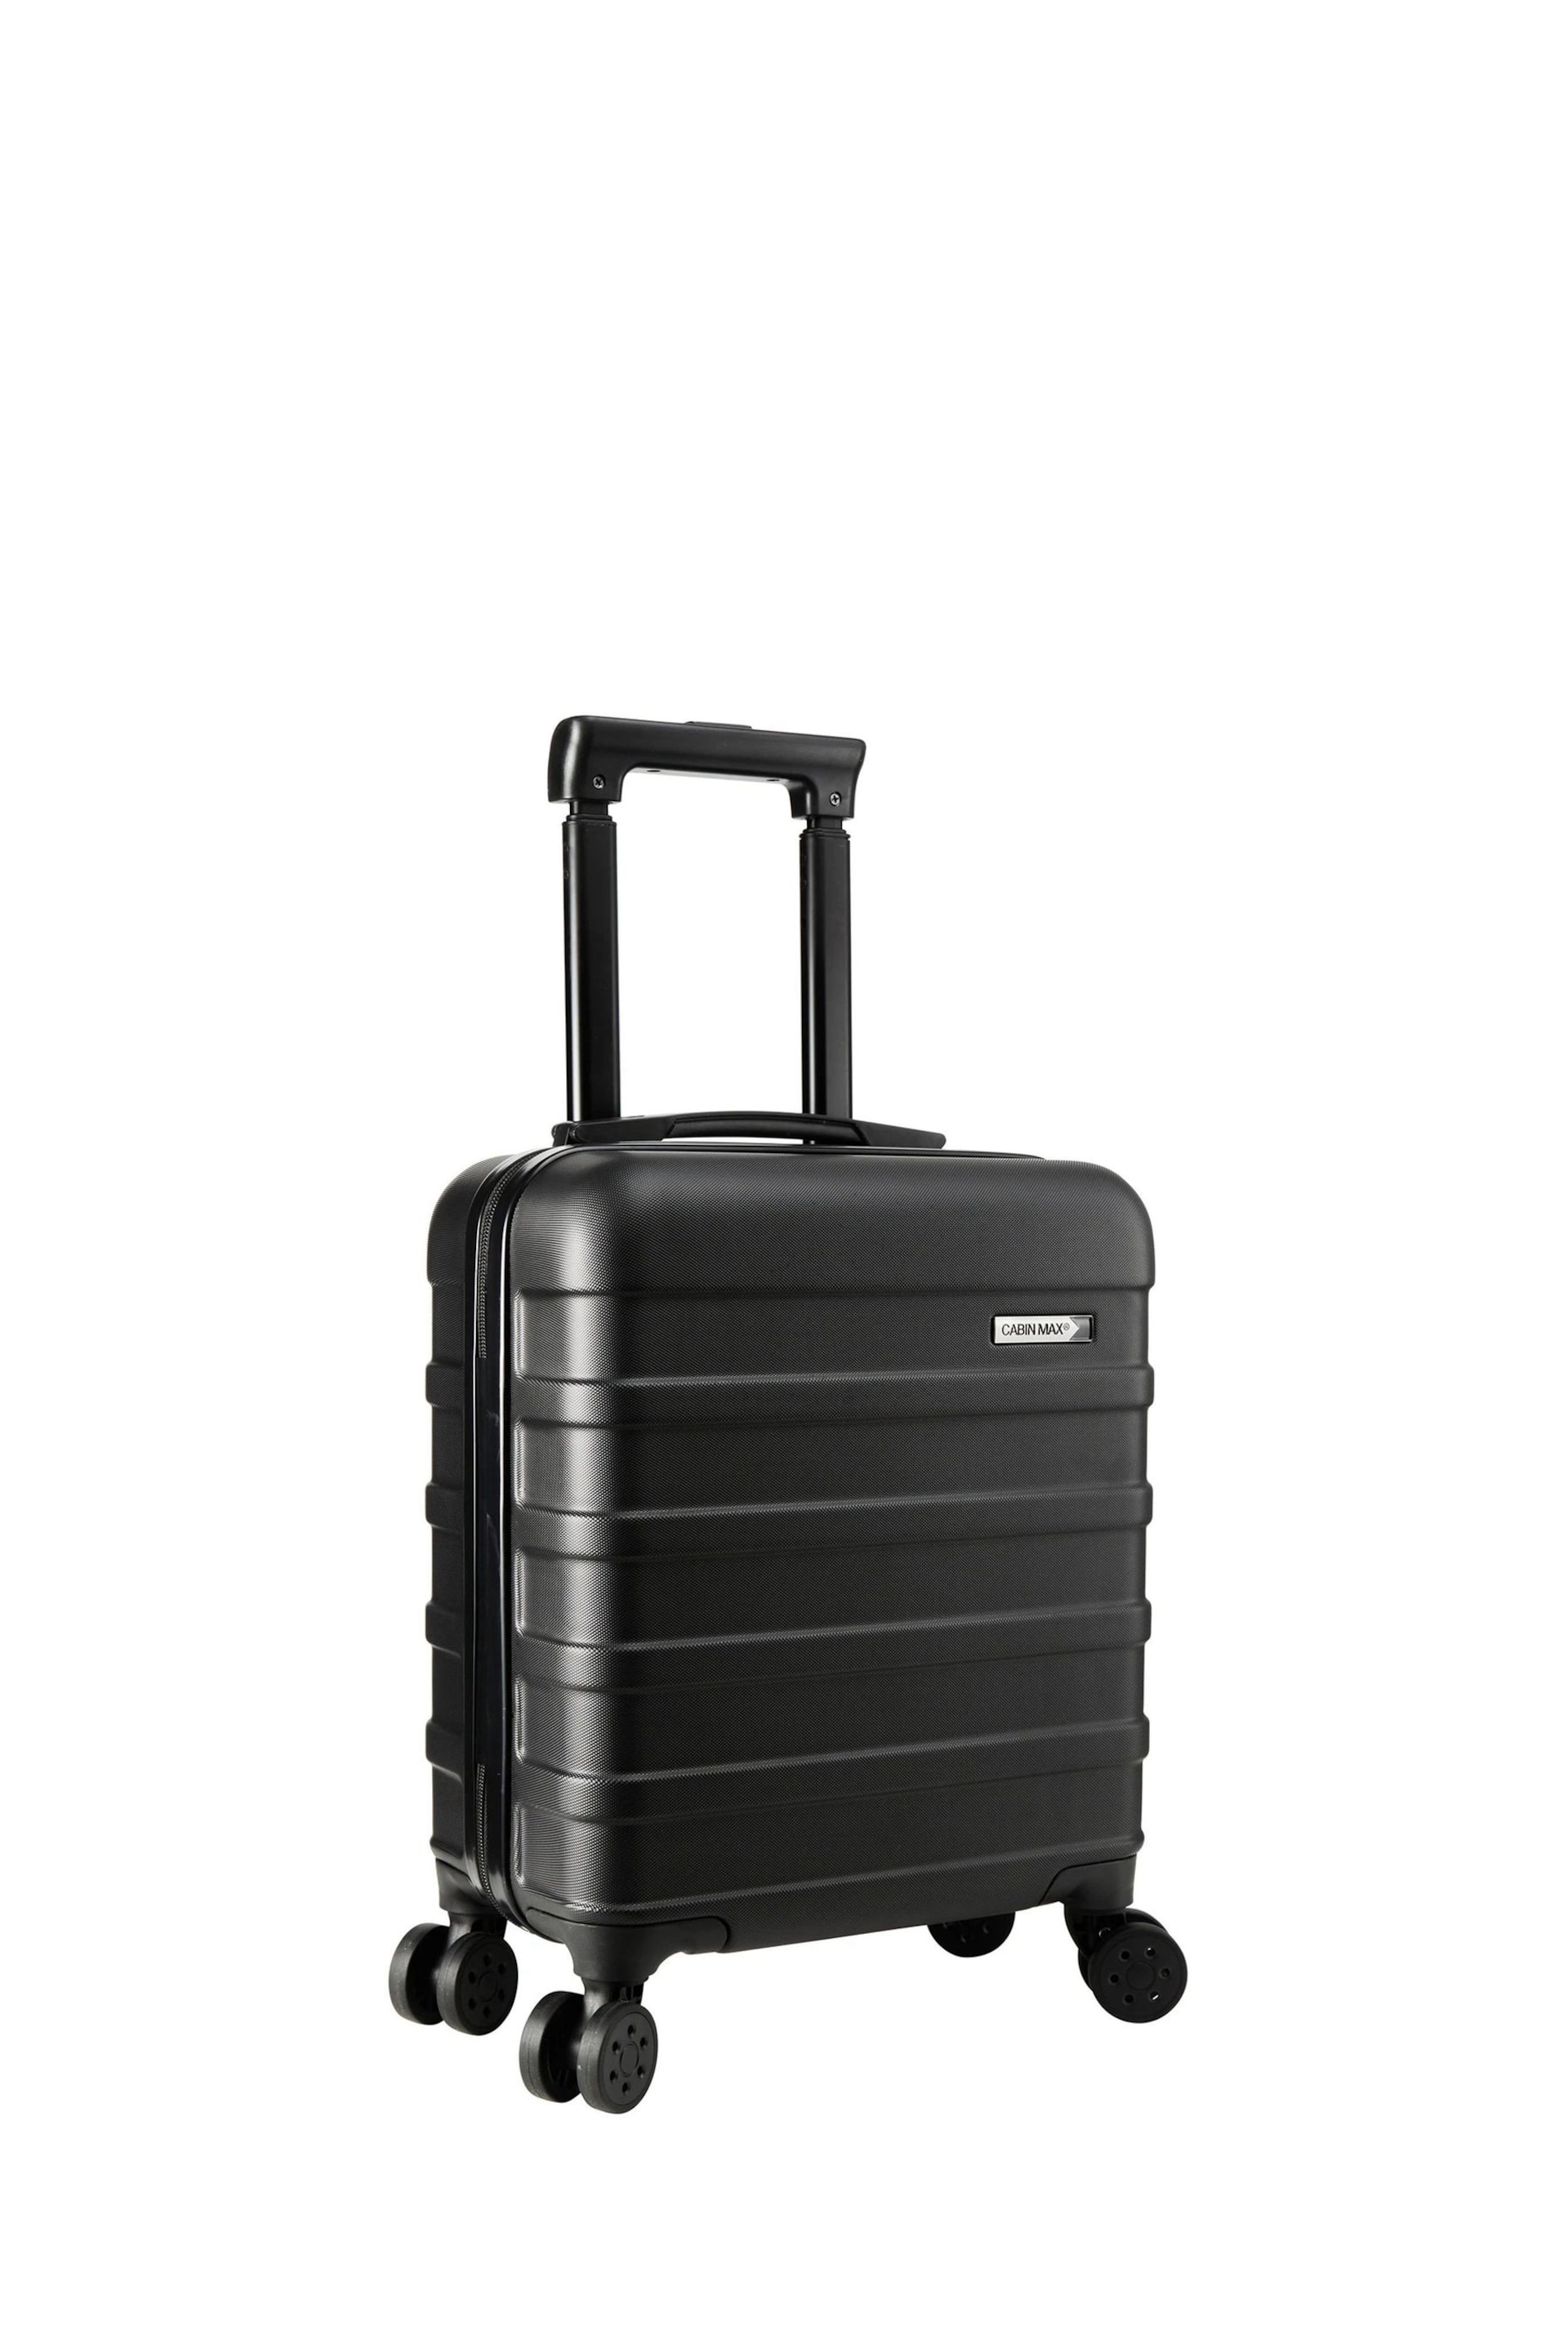 Cabin Max Anode Four Wheel Carry On Easyjet Sized Underseat 45cm Suitcase - Image 2 of 6